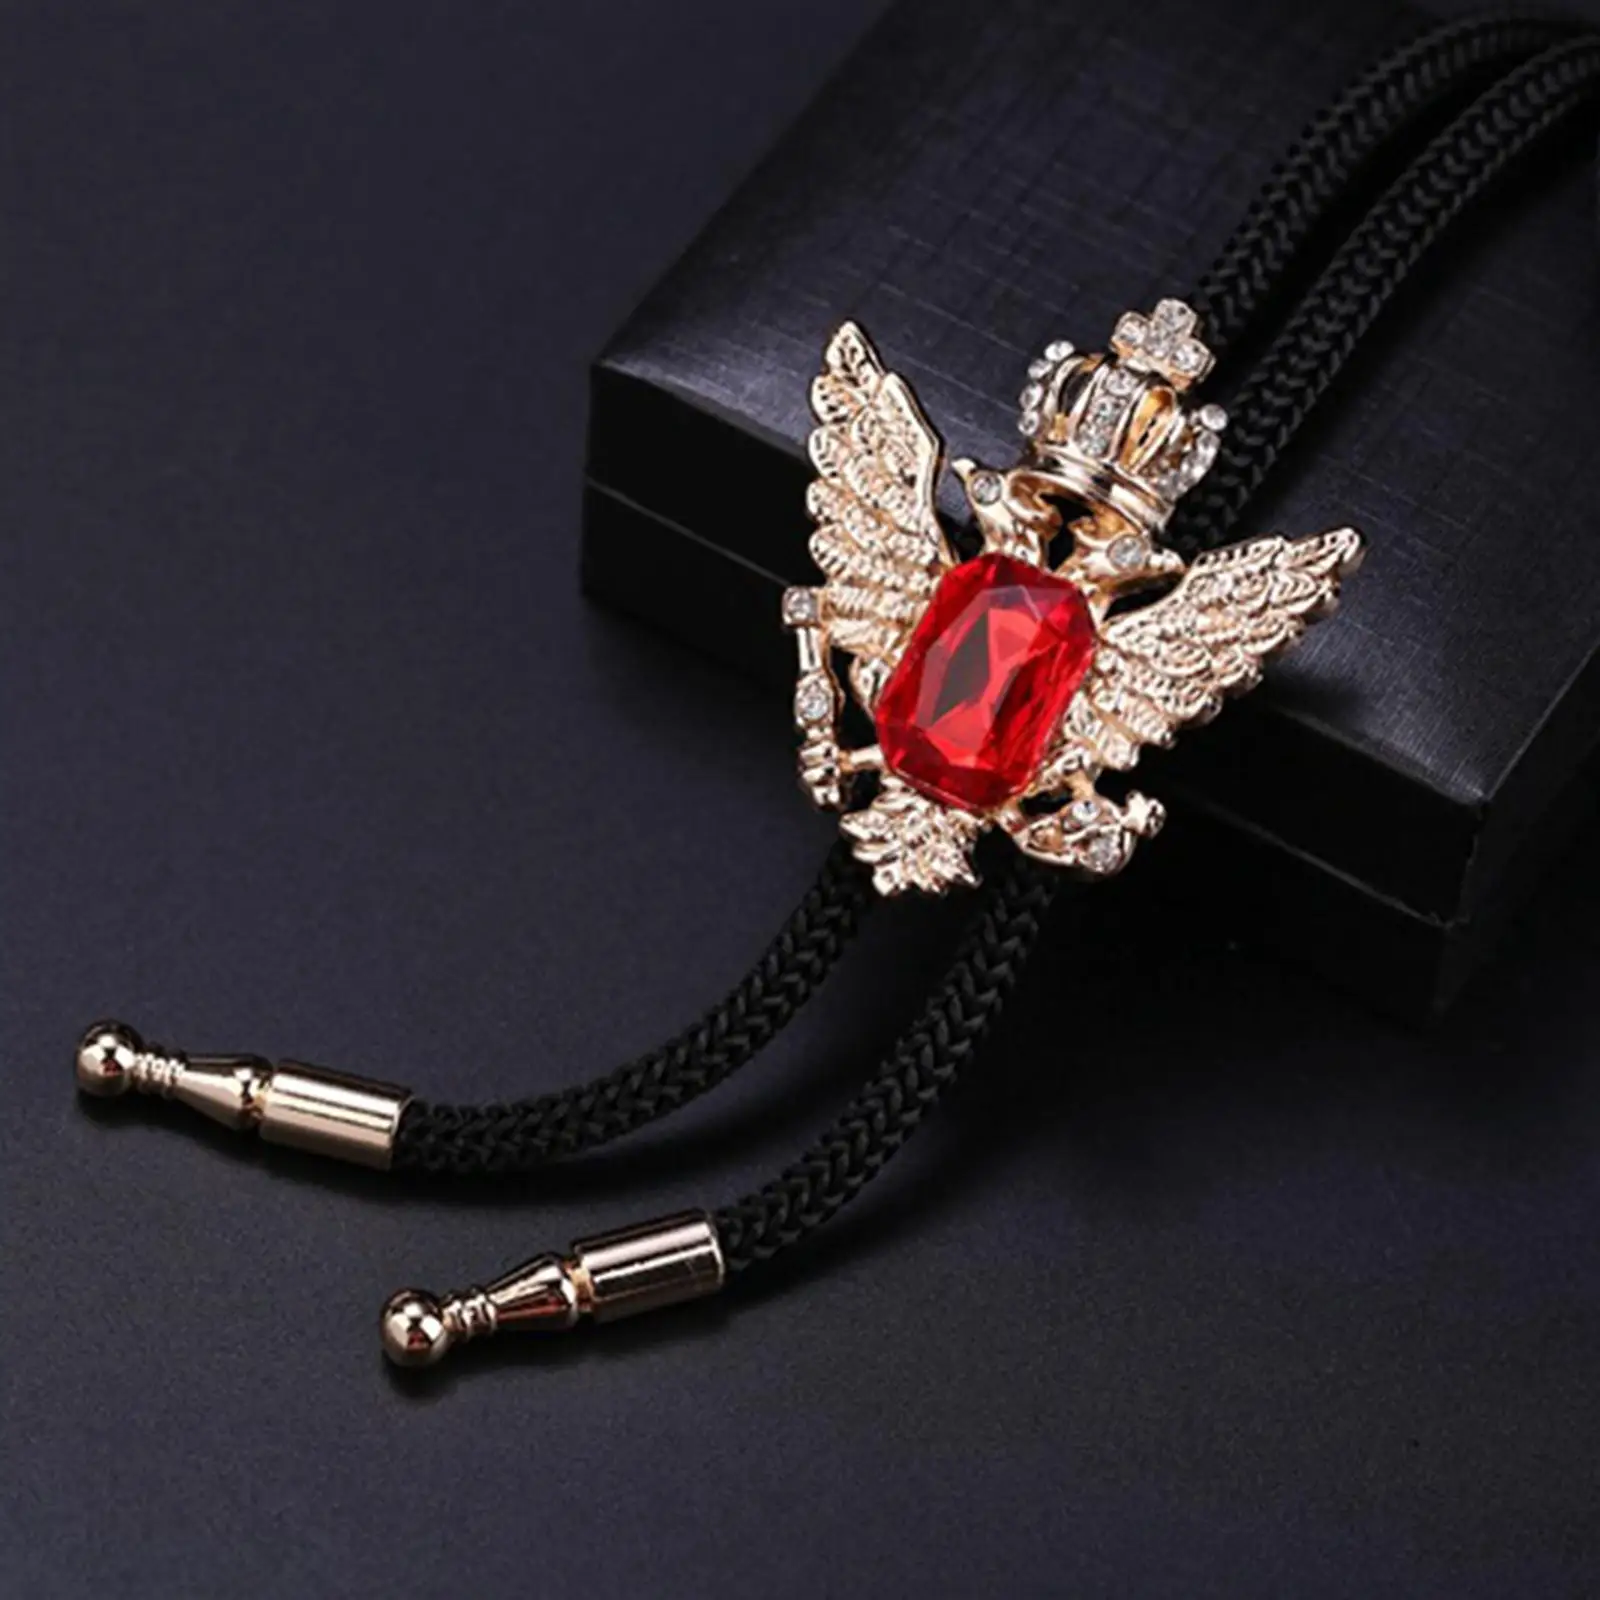 Double Headed Eagle Rhinestone Pendant Bolo Tie, for Holidays Christmas Halloween Costume Accessories